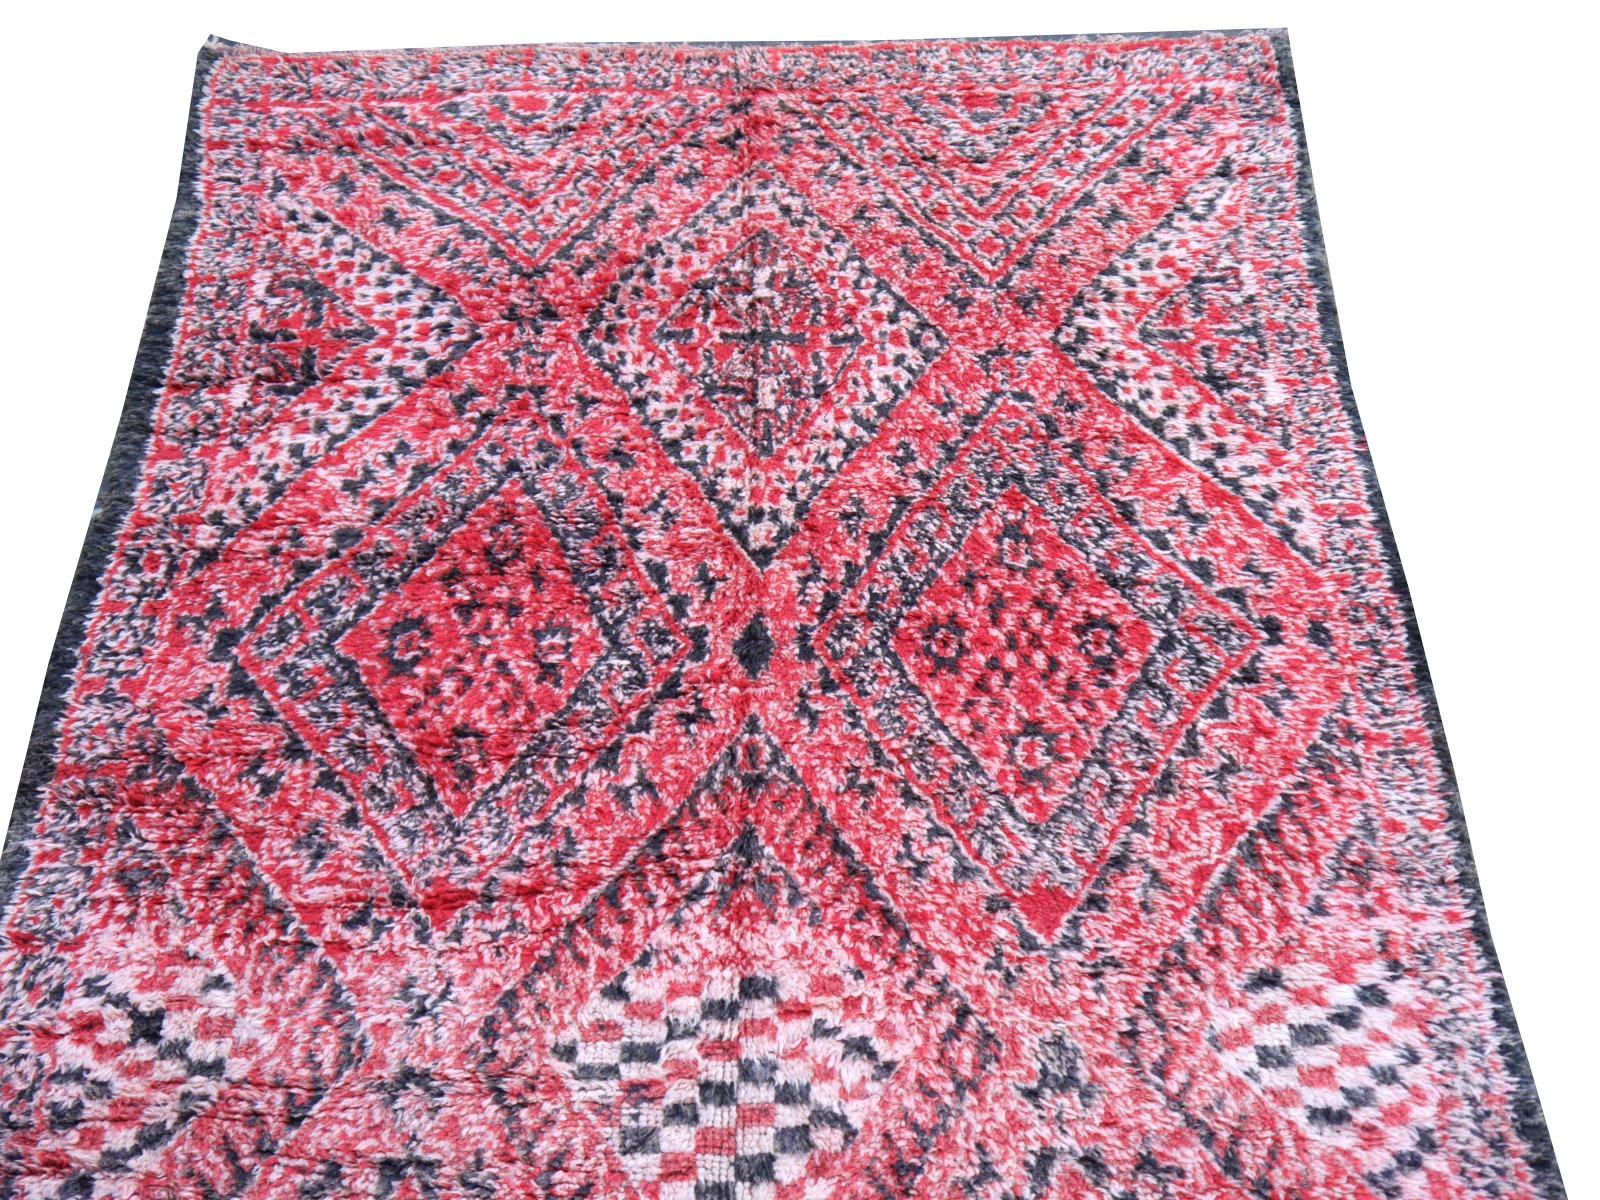 Moroccan Vintage Rug North African Diamond Design Wool Red Pink Charcoal White For Sale 14